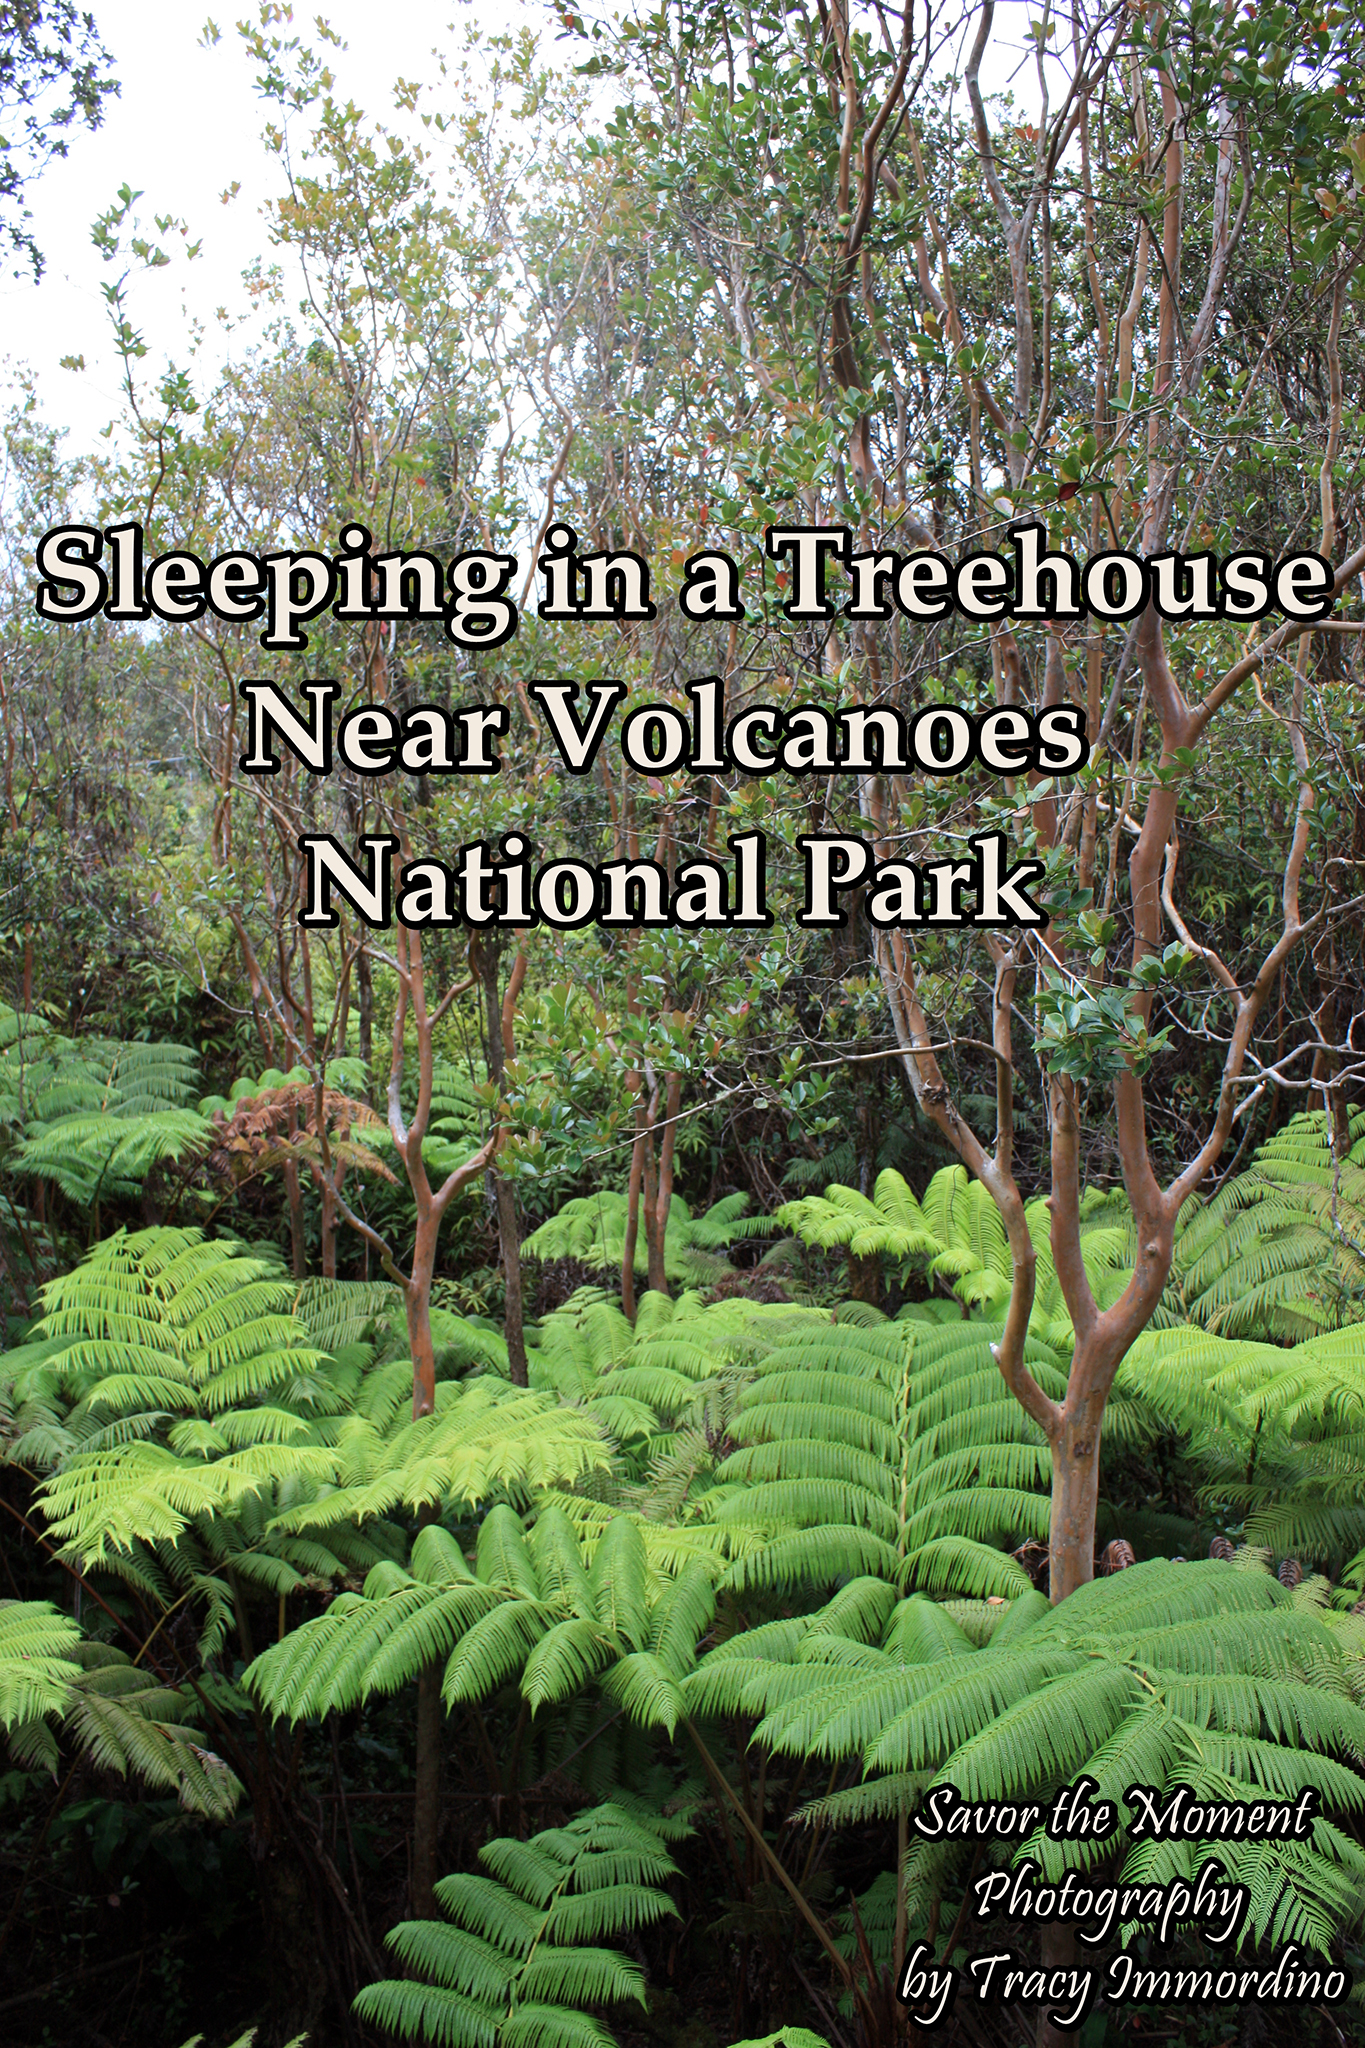 Sleeping in a Treehouse Near Volcanoes National Park